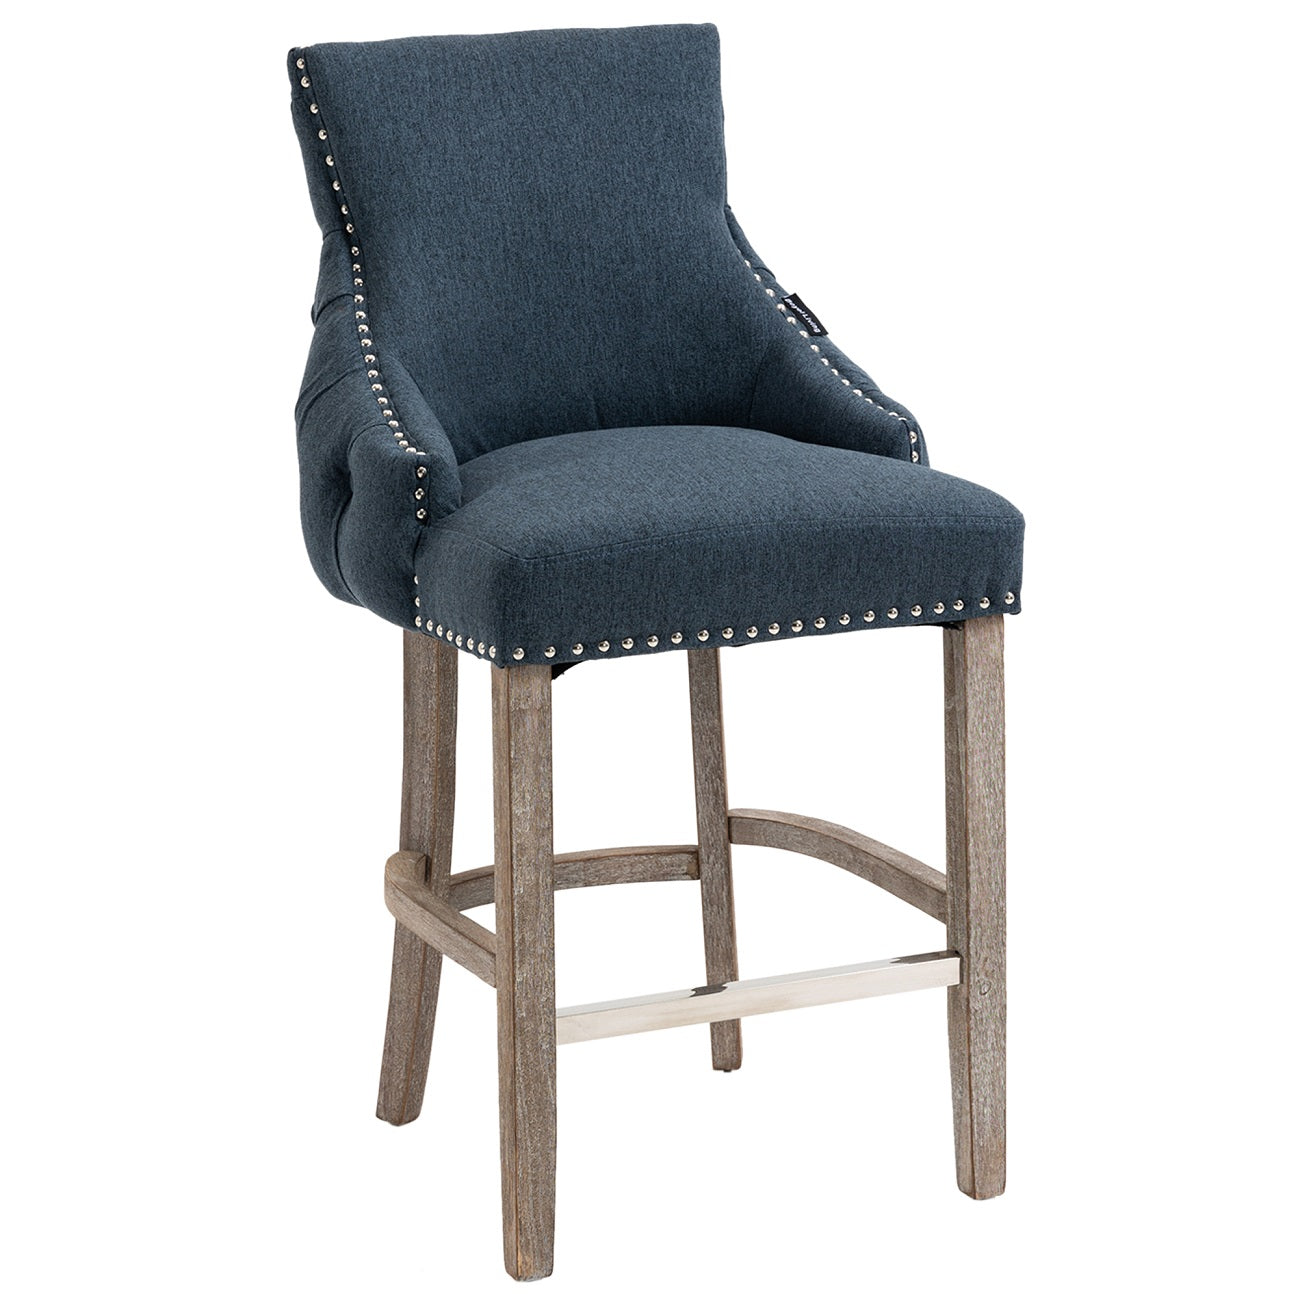 40 in. Dark Blue Linen Fabric Nailhead Tufted Bar Stool with 4 Solid Wood Legs, Set of 2-Boyel Living